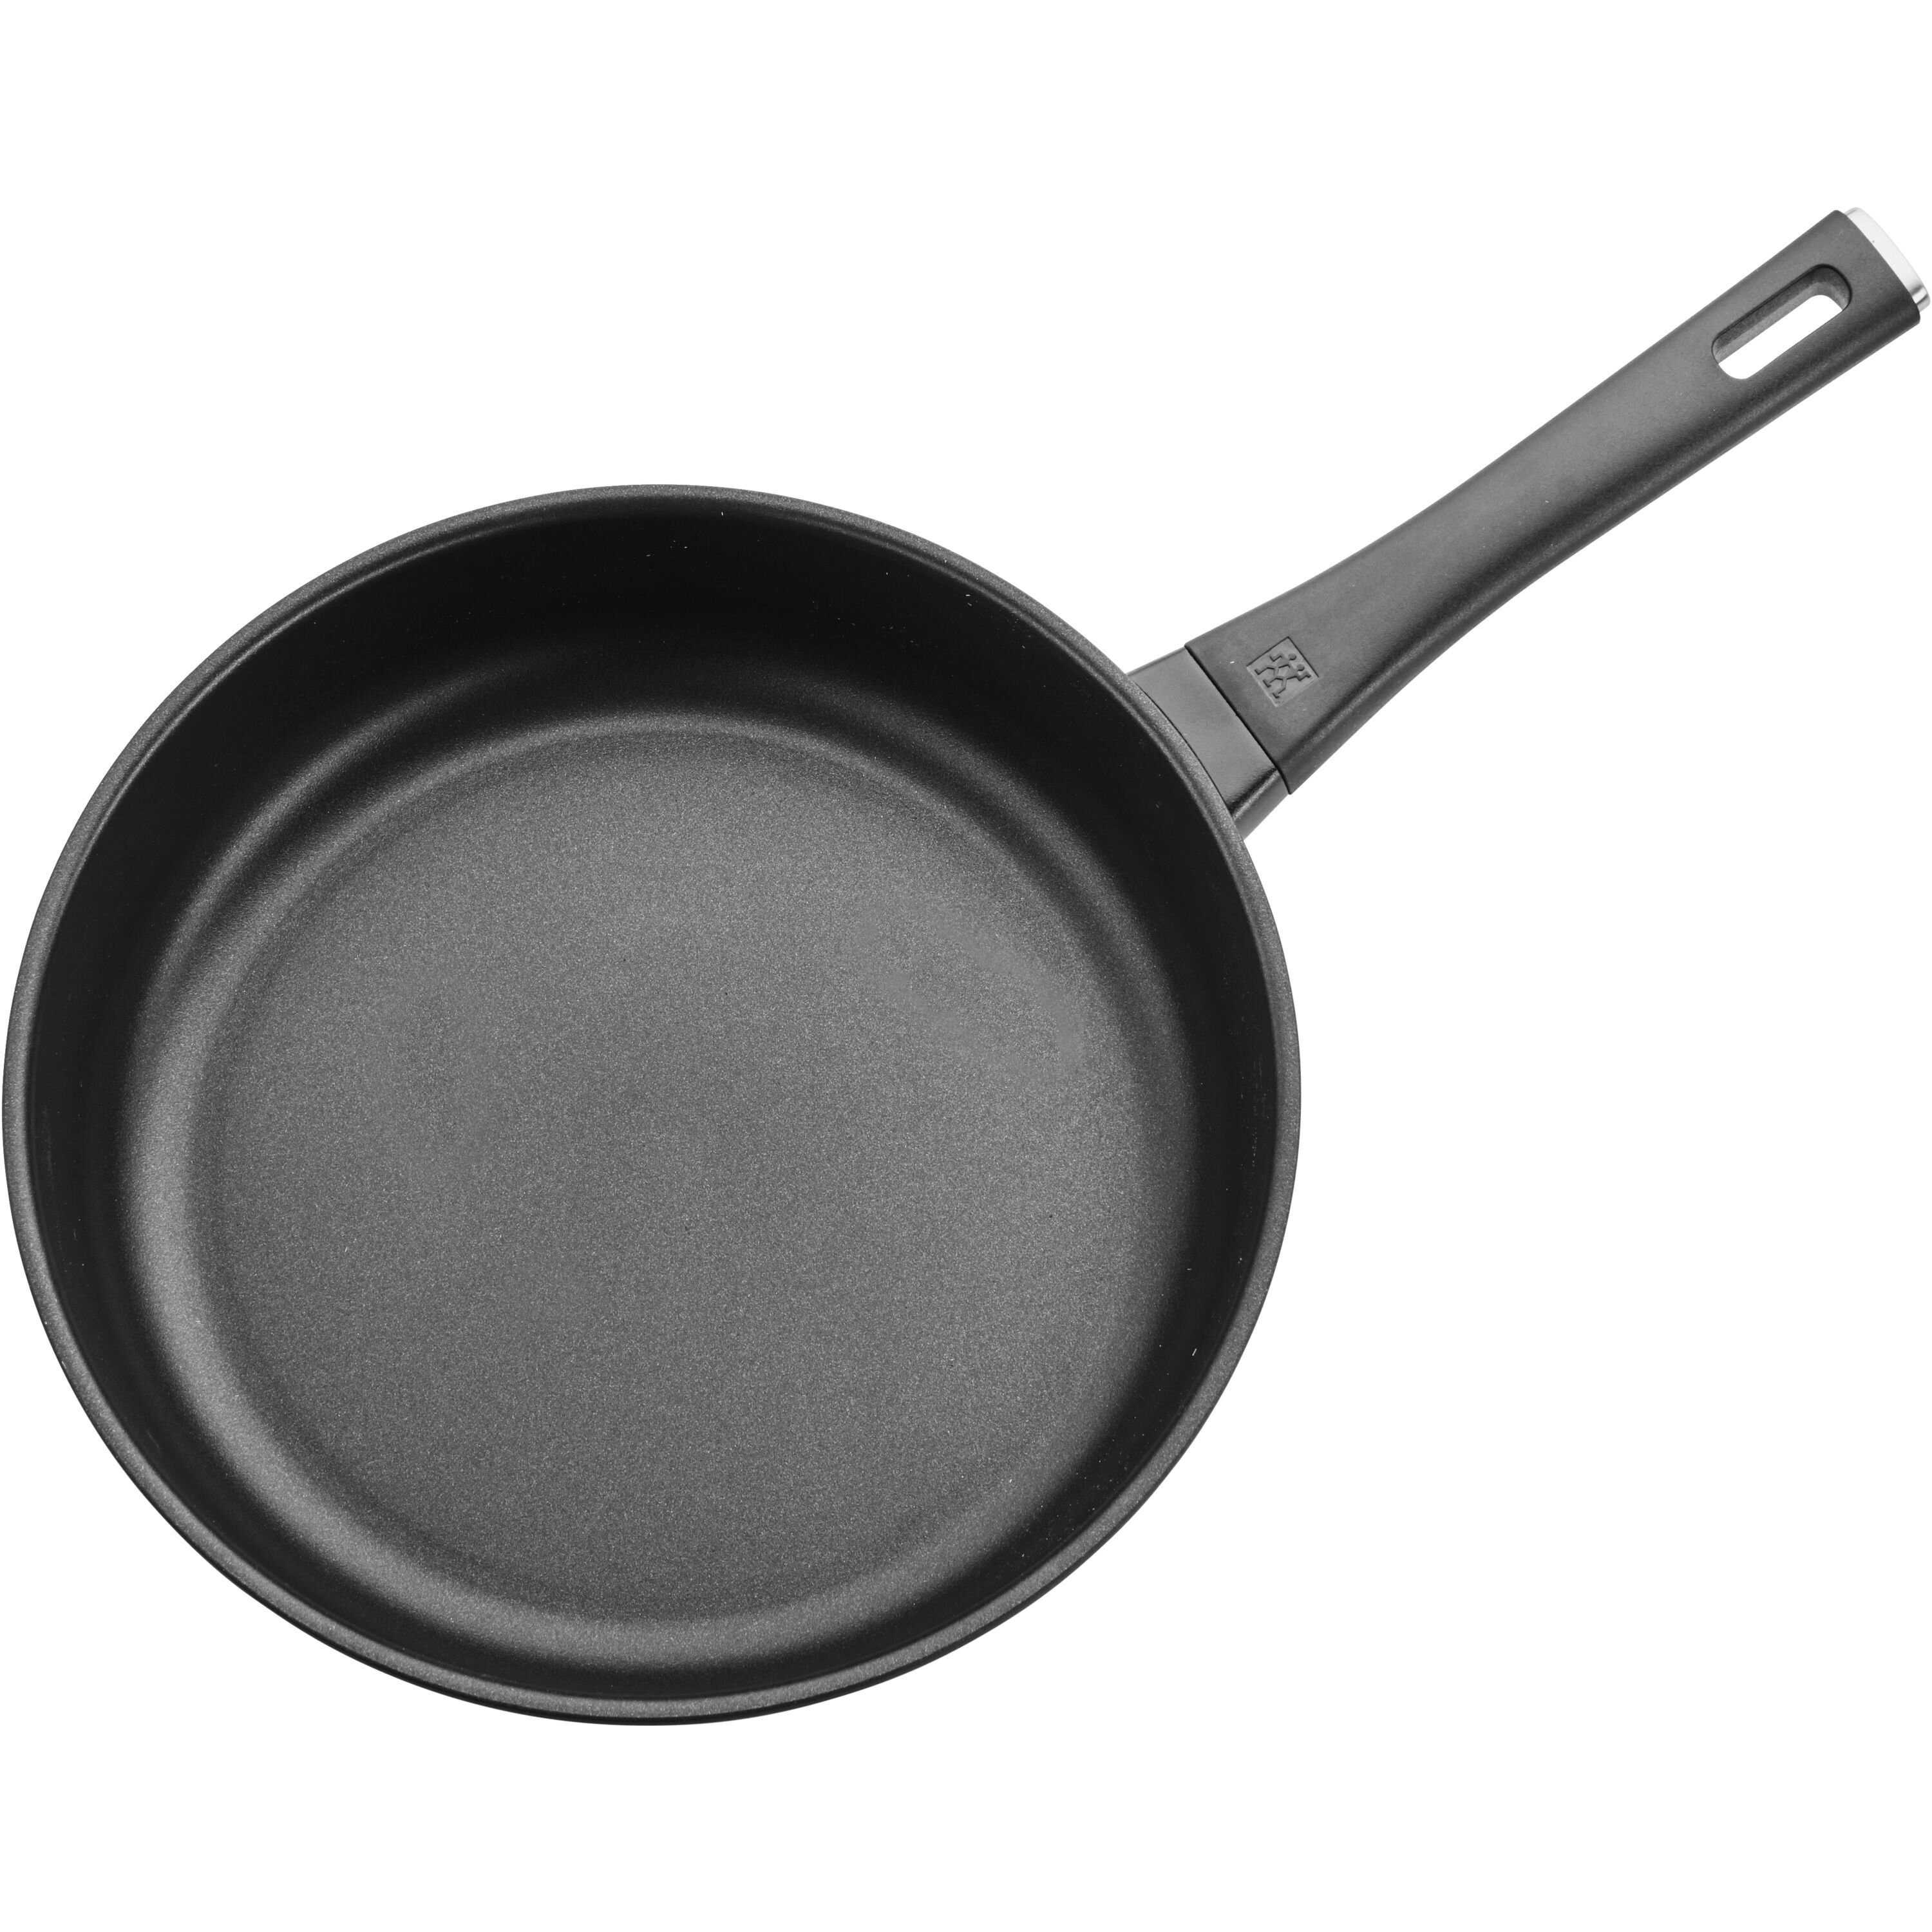 11.5 Zwilling Madura Plus Forged Nonstick Fry Pan (Part number